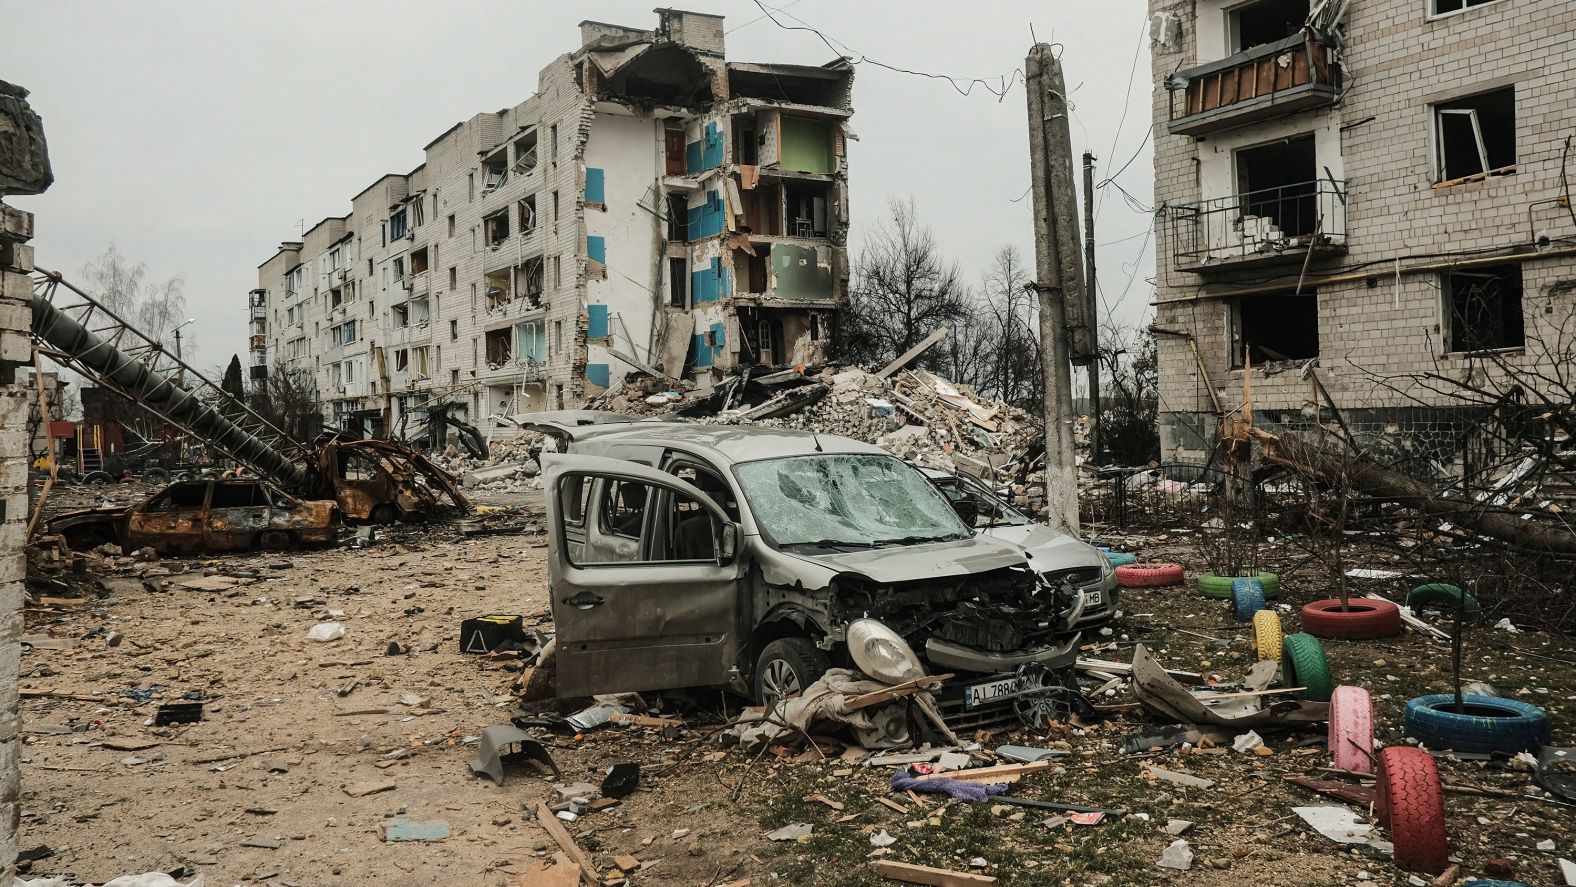 Destruction is seen in Borodianka on April 5. Borodianka was home to 13,000 people before the war, but most fled after Russia's invasion. <a href="index.php?page=&url=https%3A%2F%2Fwww.cnn.com%2F2022%2F04%2F05%2Feurope%2Fborodianka-ukraine-deaths-destruction-intl%2Findex.html" target="_blank">What was left of the town,</a> after intense shelling and devastating airstrikes, was then occupied by Russian forces.